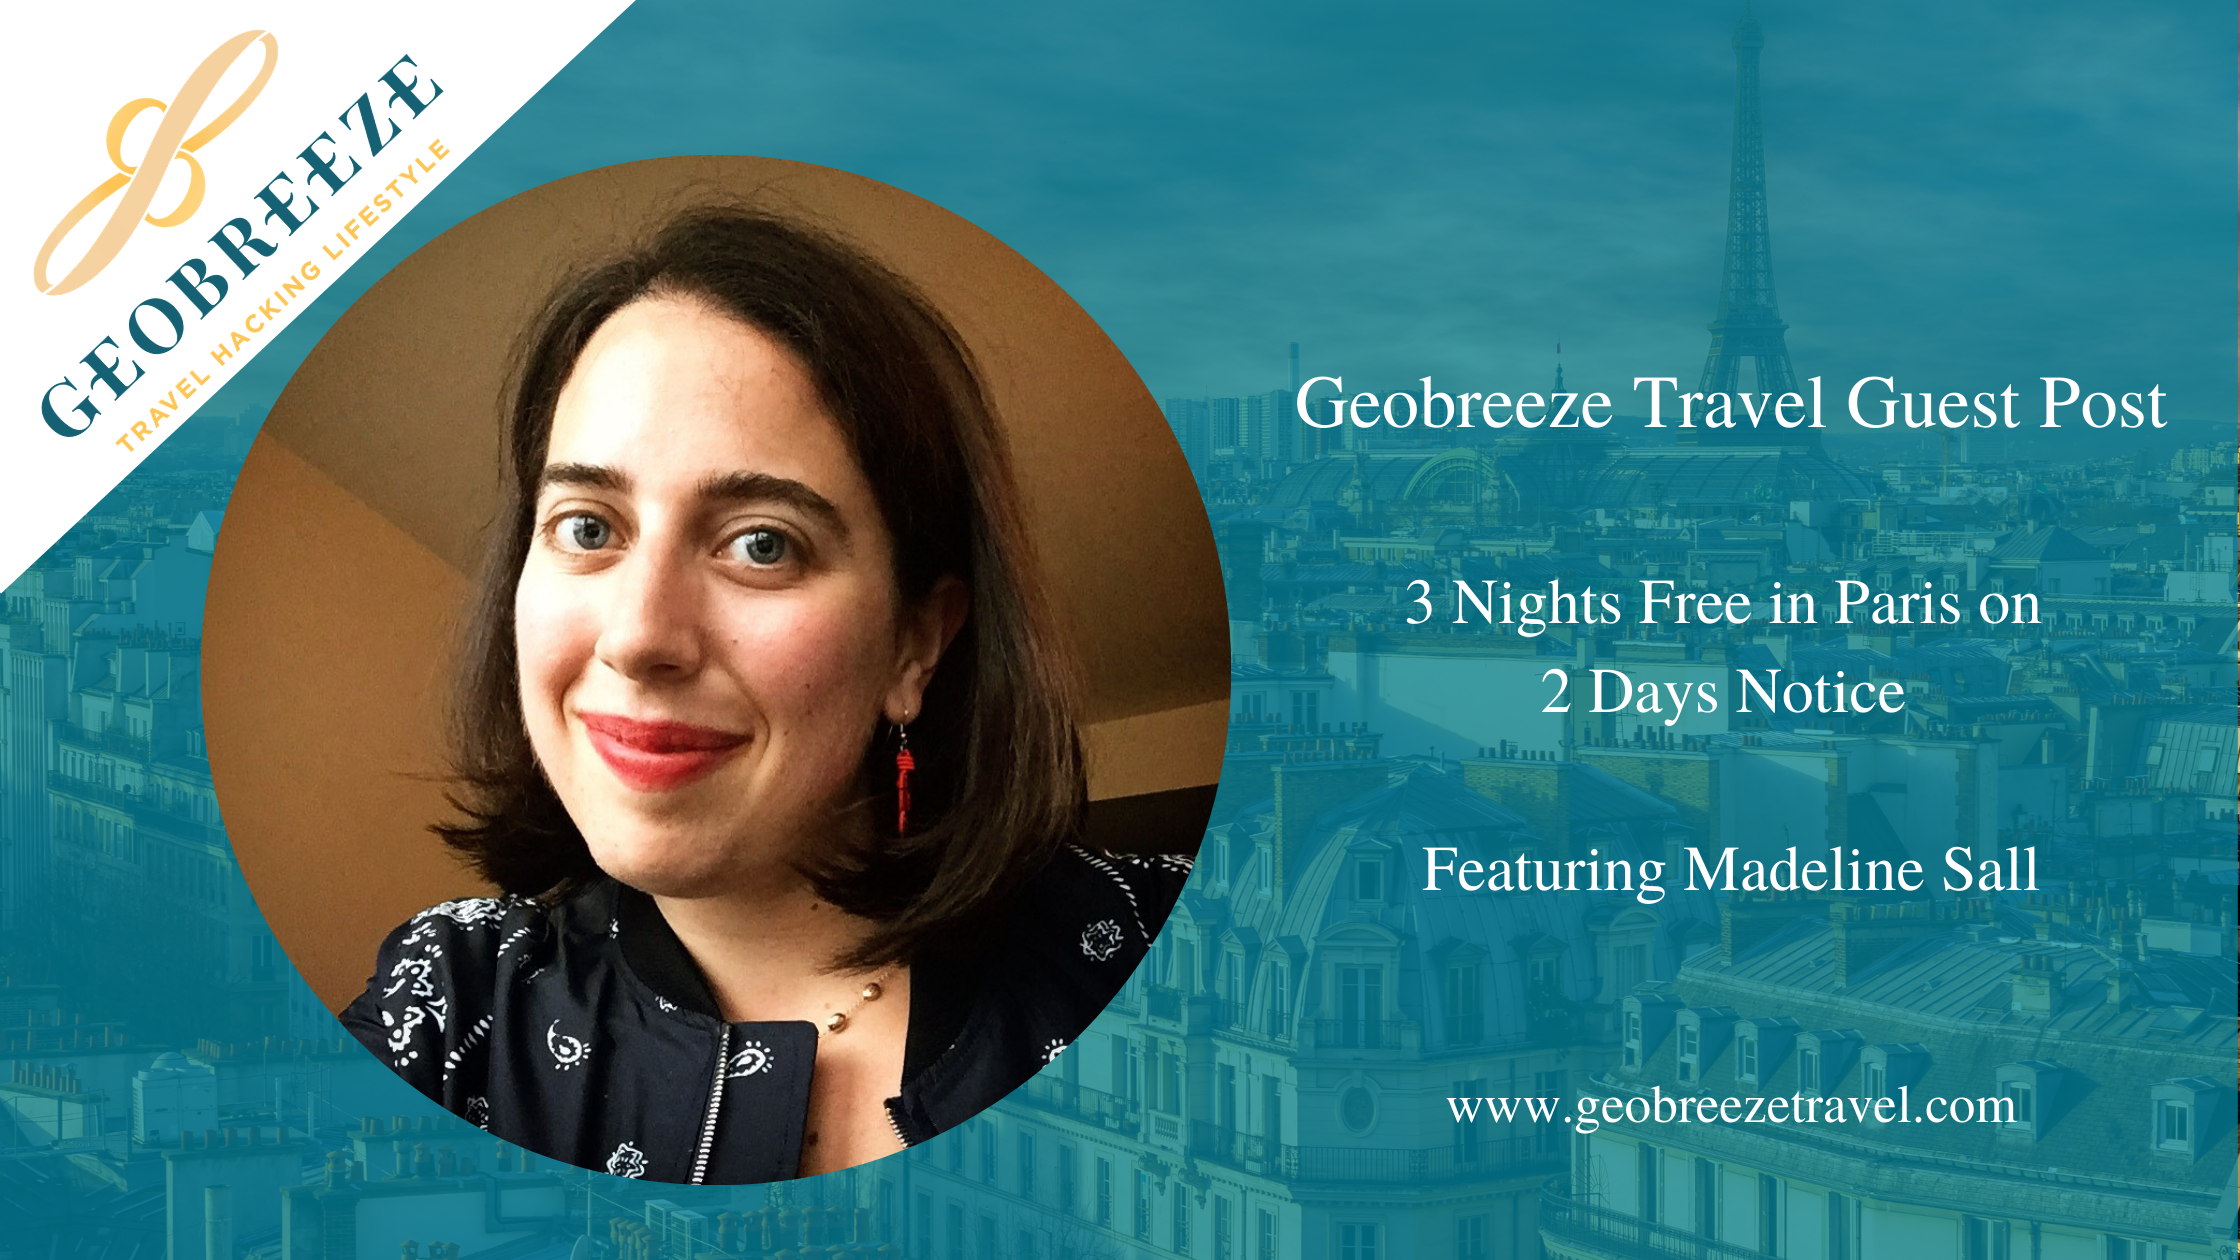 Guest Post: 3 Nights Free in Paris on 2 Days Notice with Madeline Sall